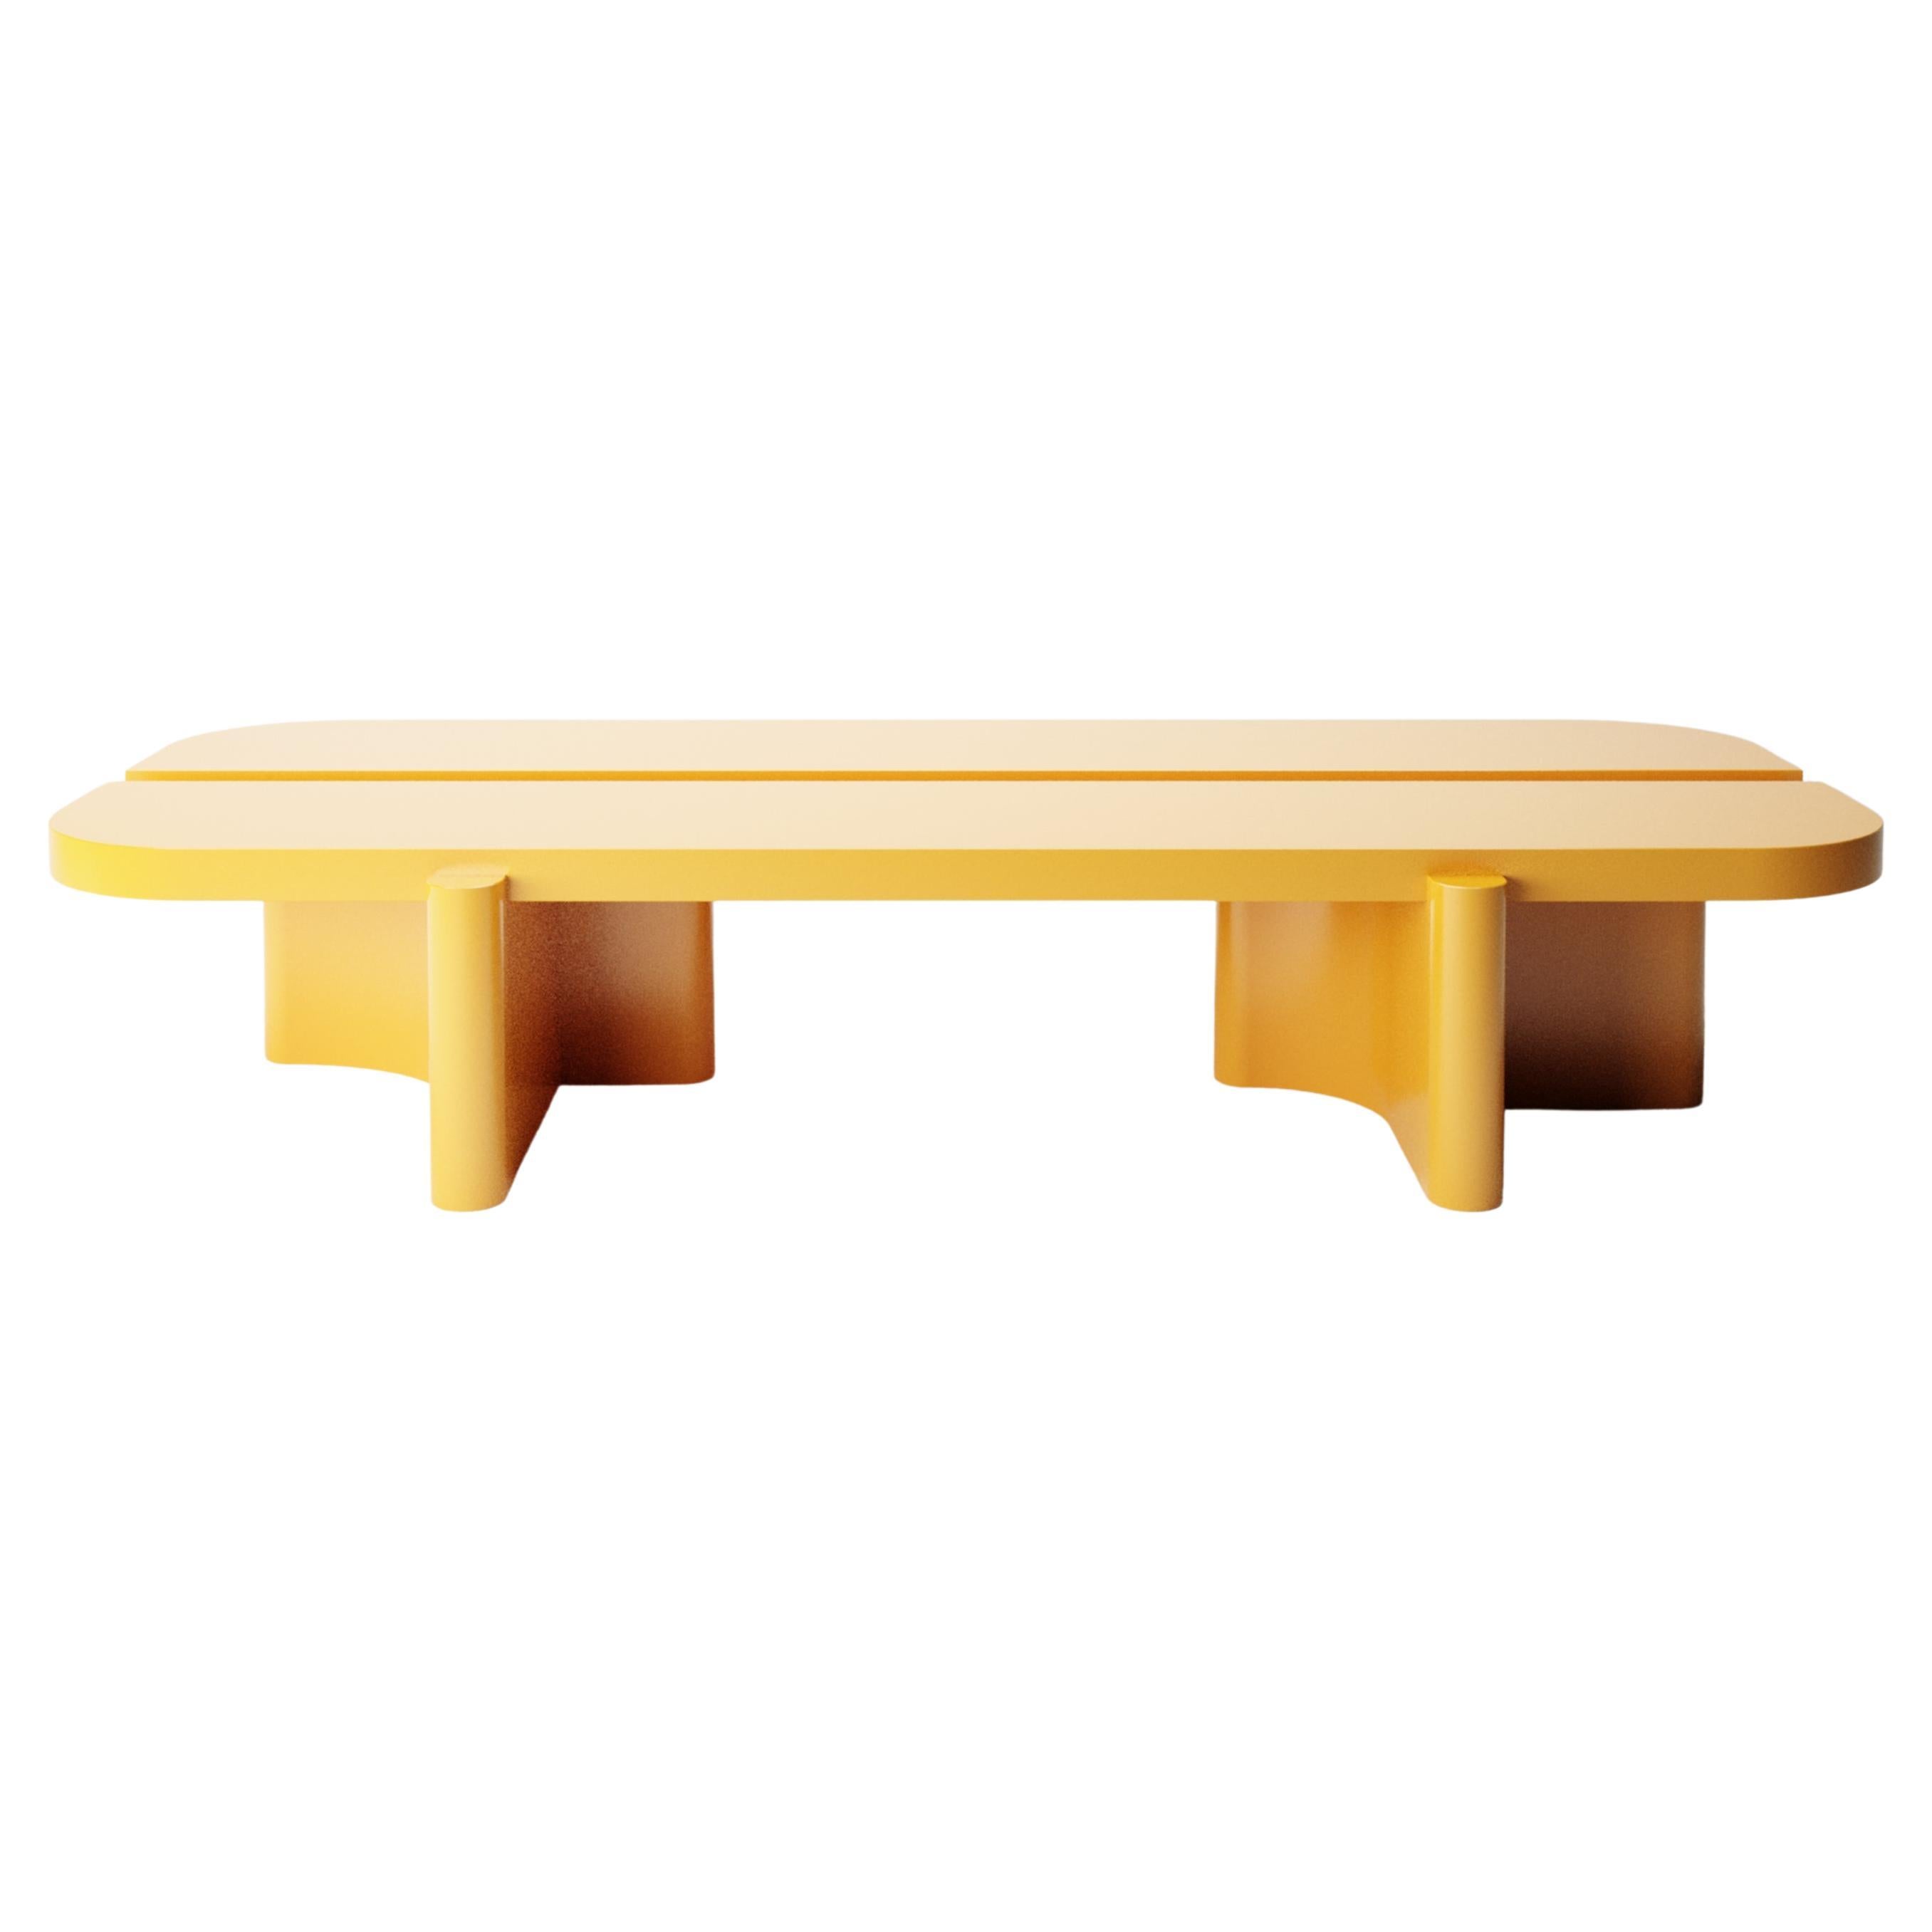 Collector -Designed by Studio Rigiera Center Table Lackiert  im Angebot